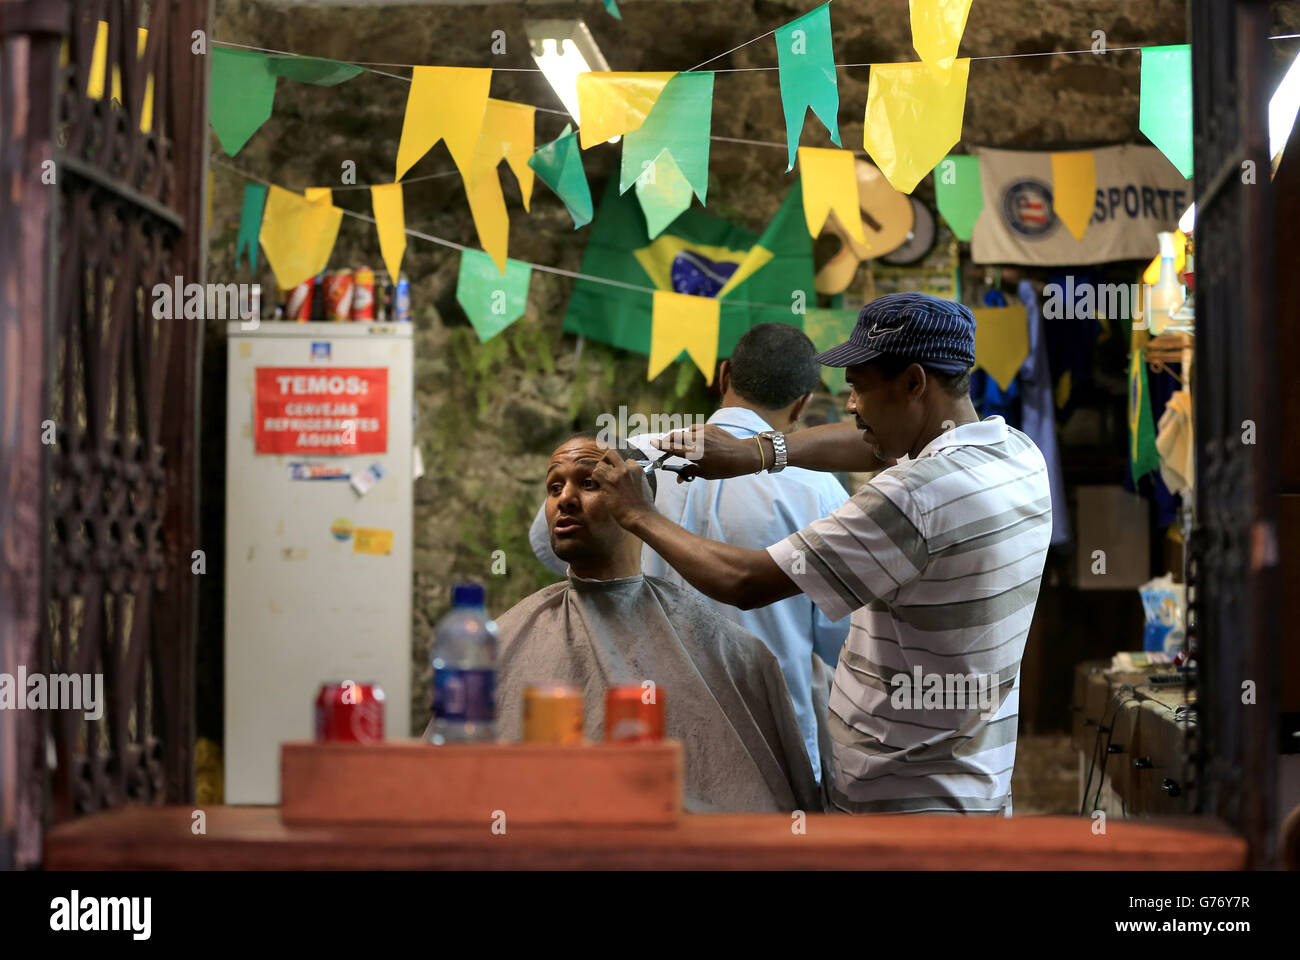 Soccer - FIFA World Cup 2014 - Salvador City Stock. Man gets his hair cut in the barber in the Historical Centre of Salvador Stock Photo